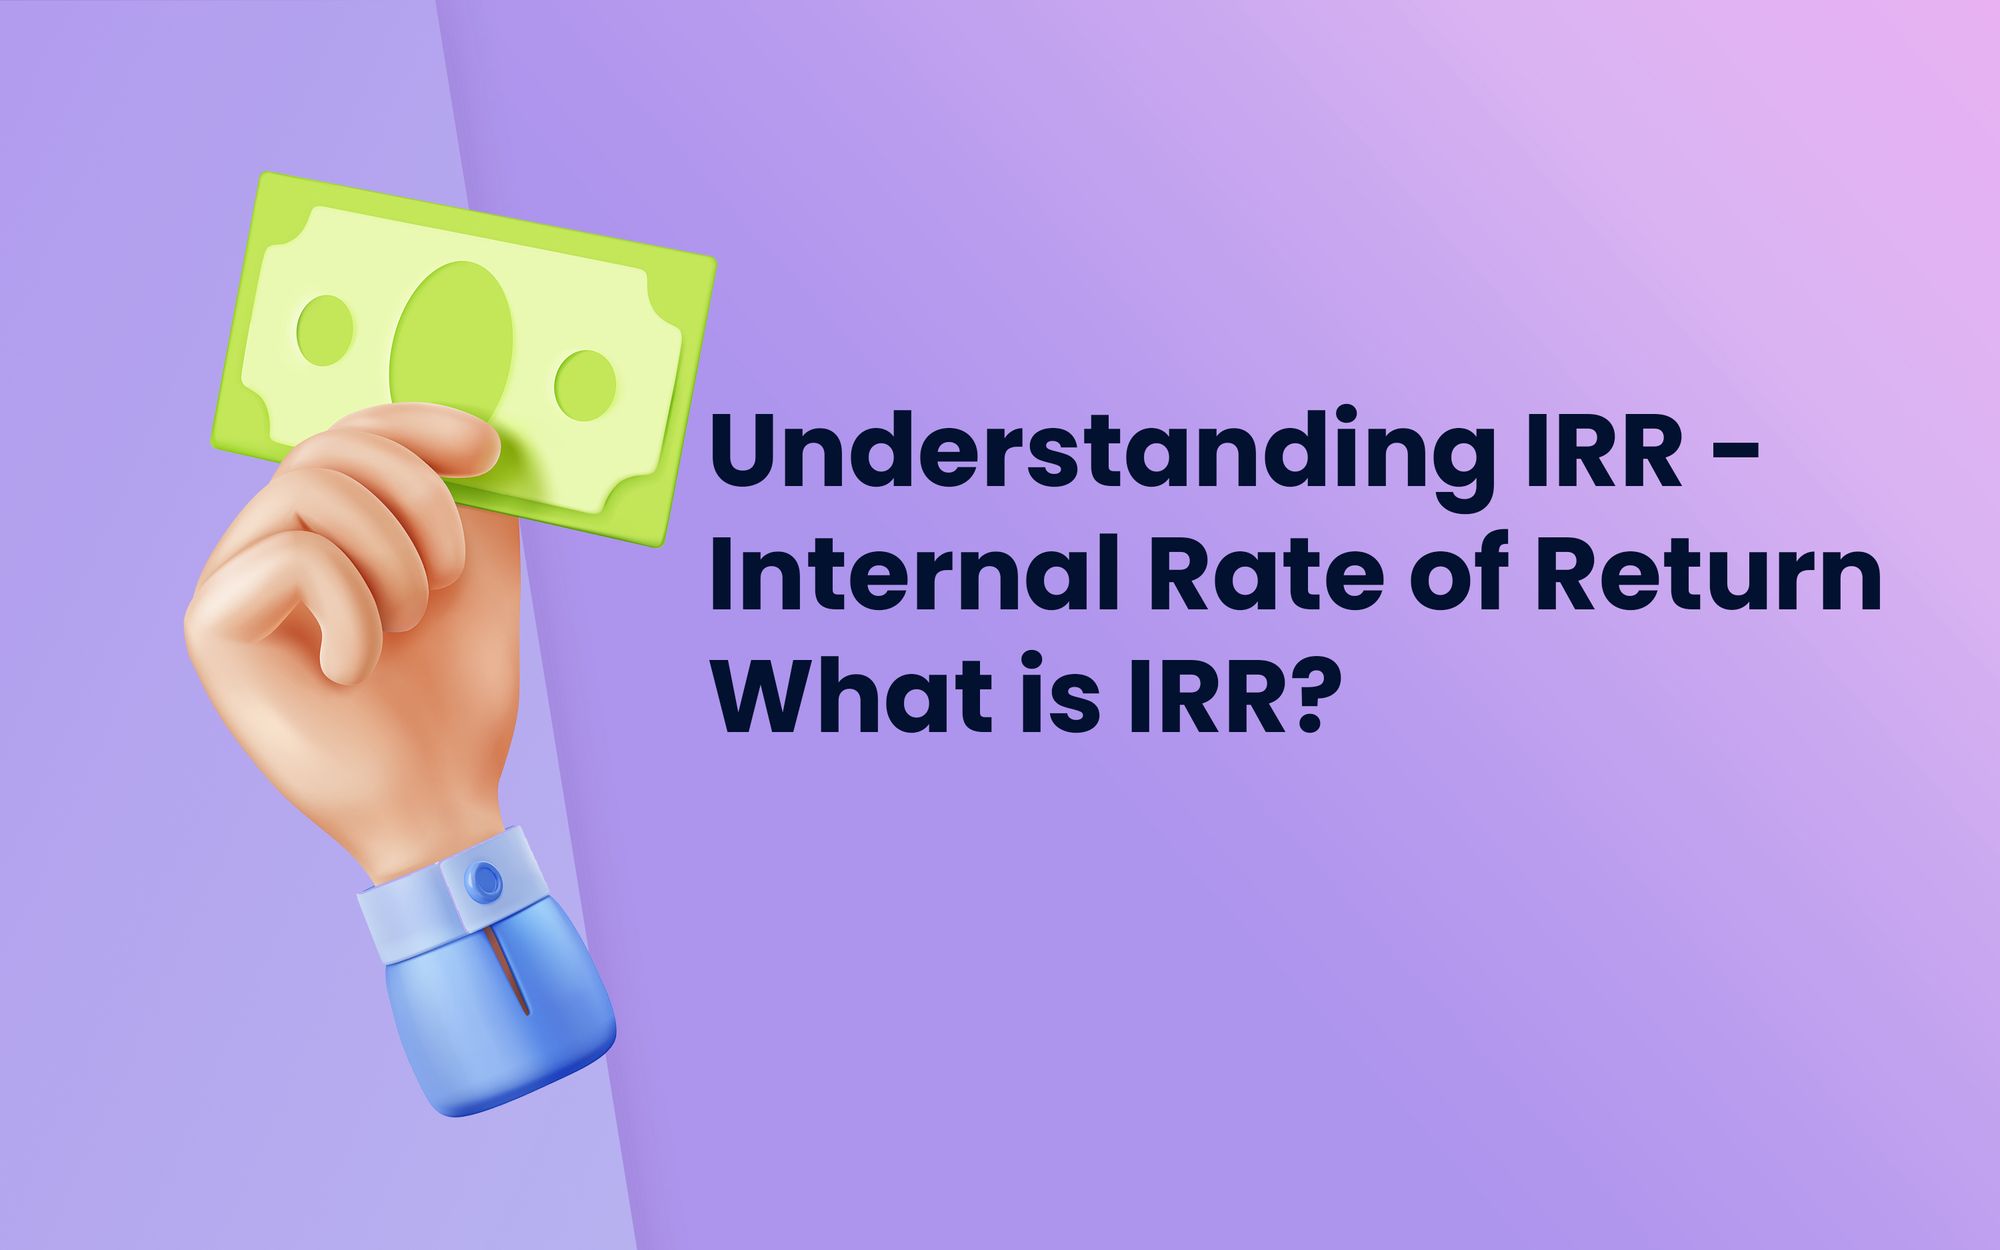 Understanding IRR (Internal Rate of Return) and How to Calculate It for Effective Investment Decision Making